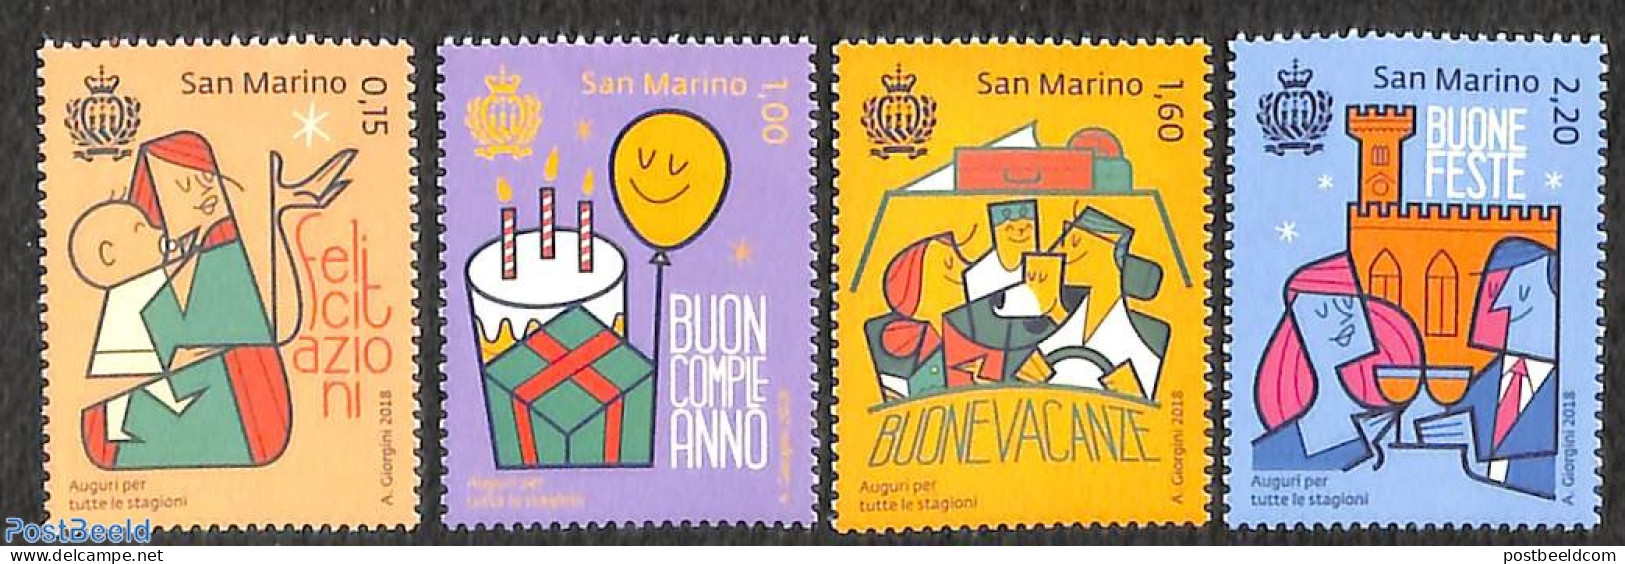 San Marino 2018 Greeting Stamps 4v, Mint NH, Various - Greetings & Wishing Stamps - Unused Stamps